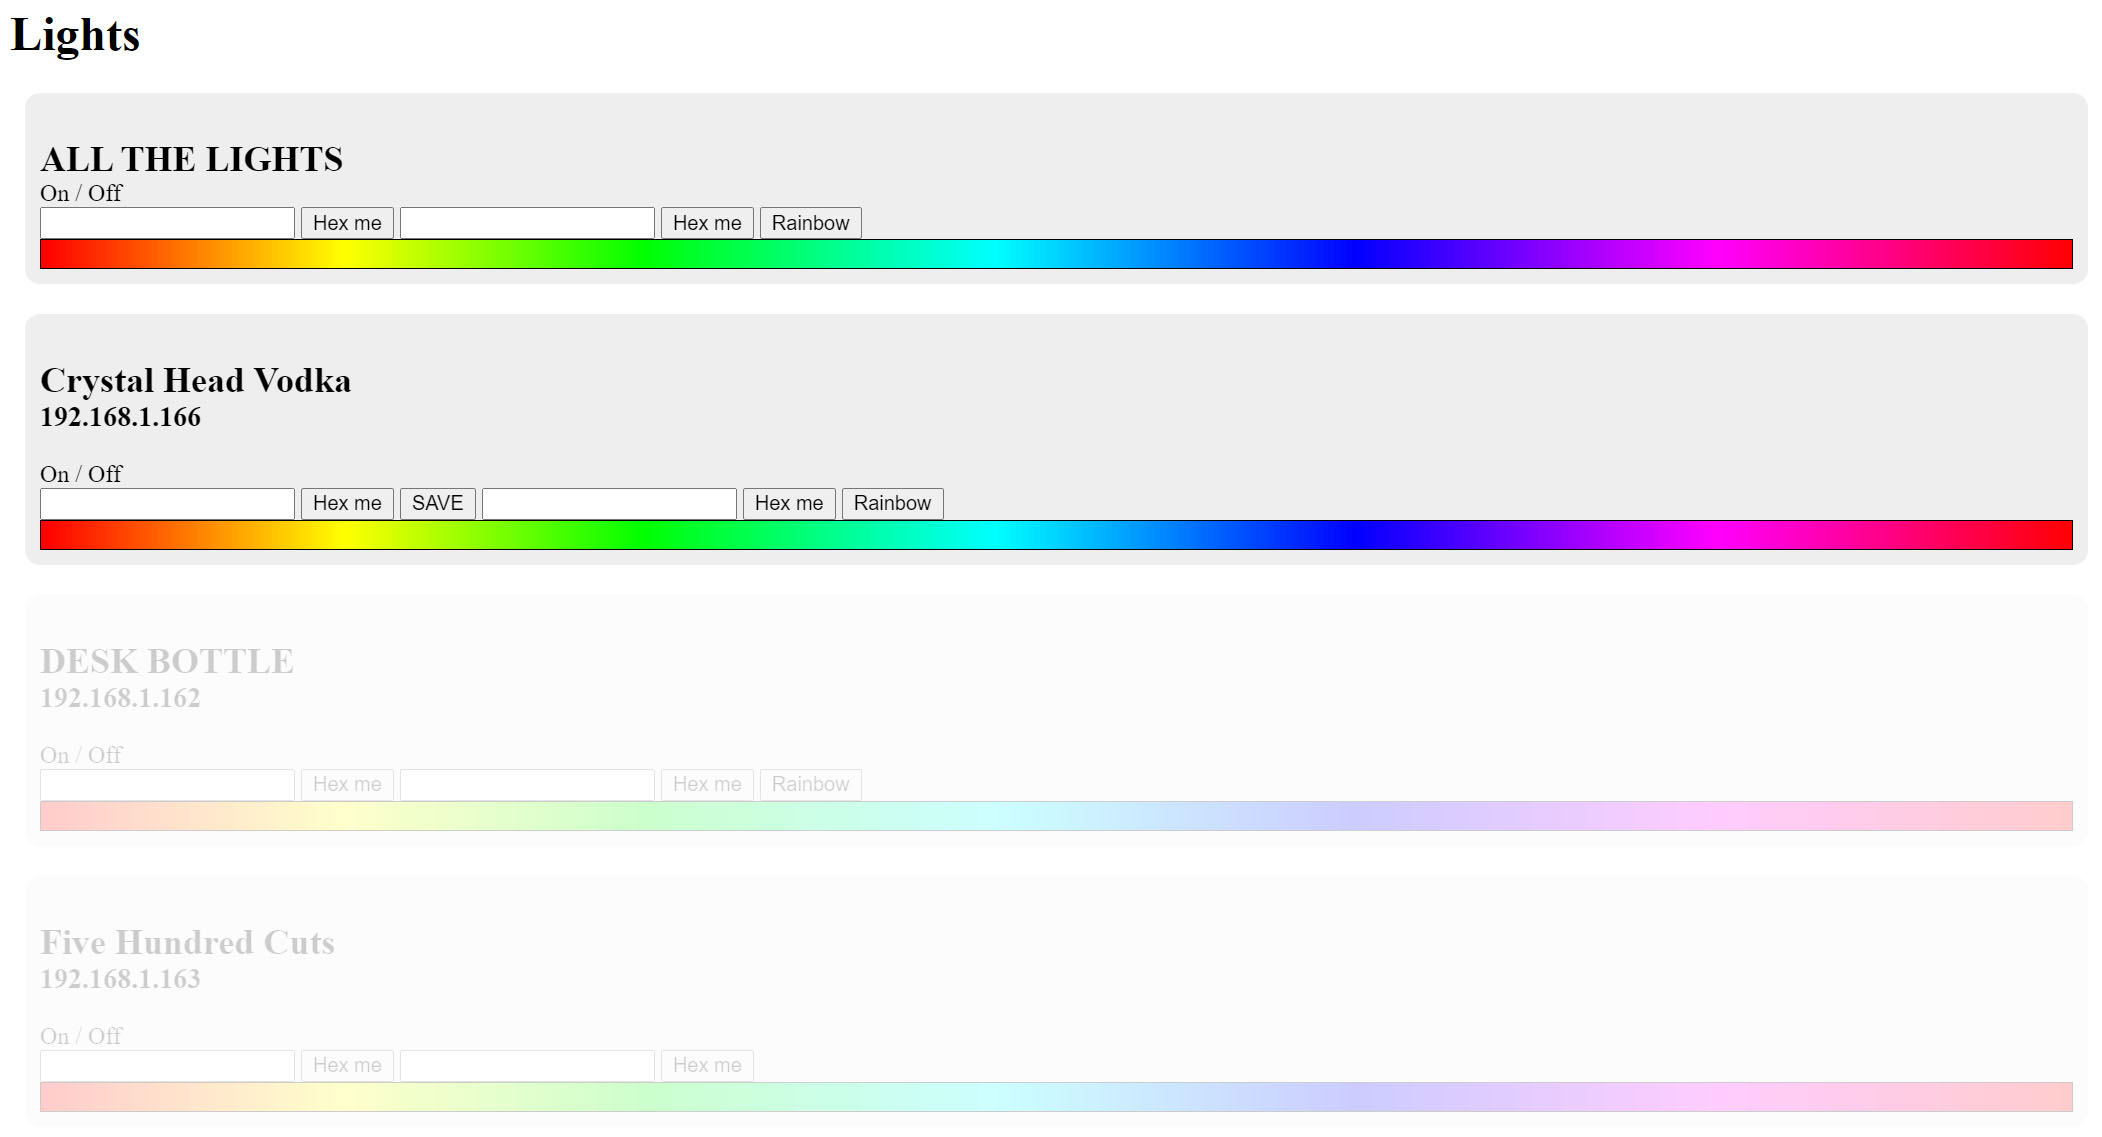 The webpage used to control the bottle lights. There are options to change the colour of the light via hexcode or hue